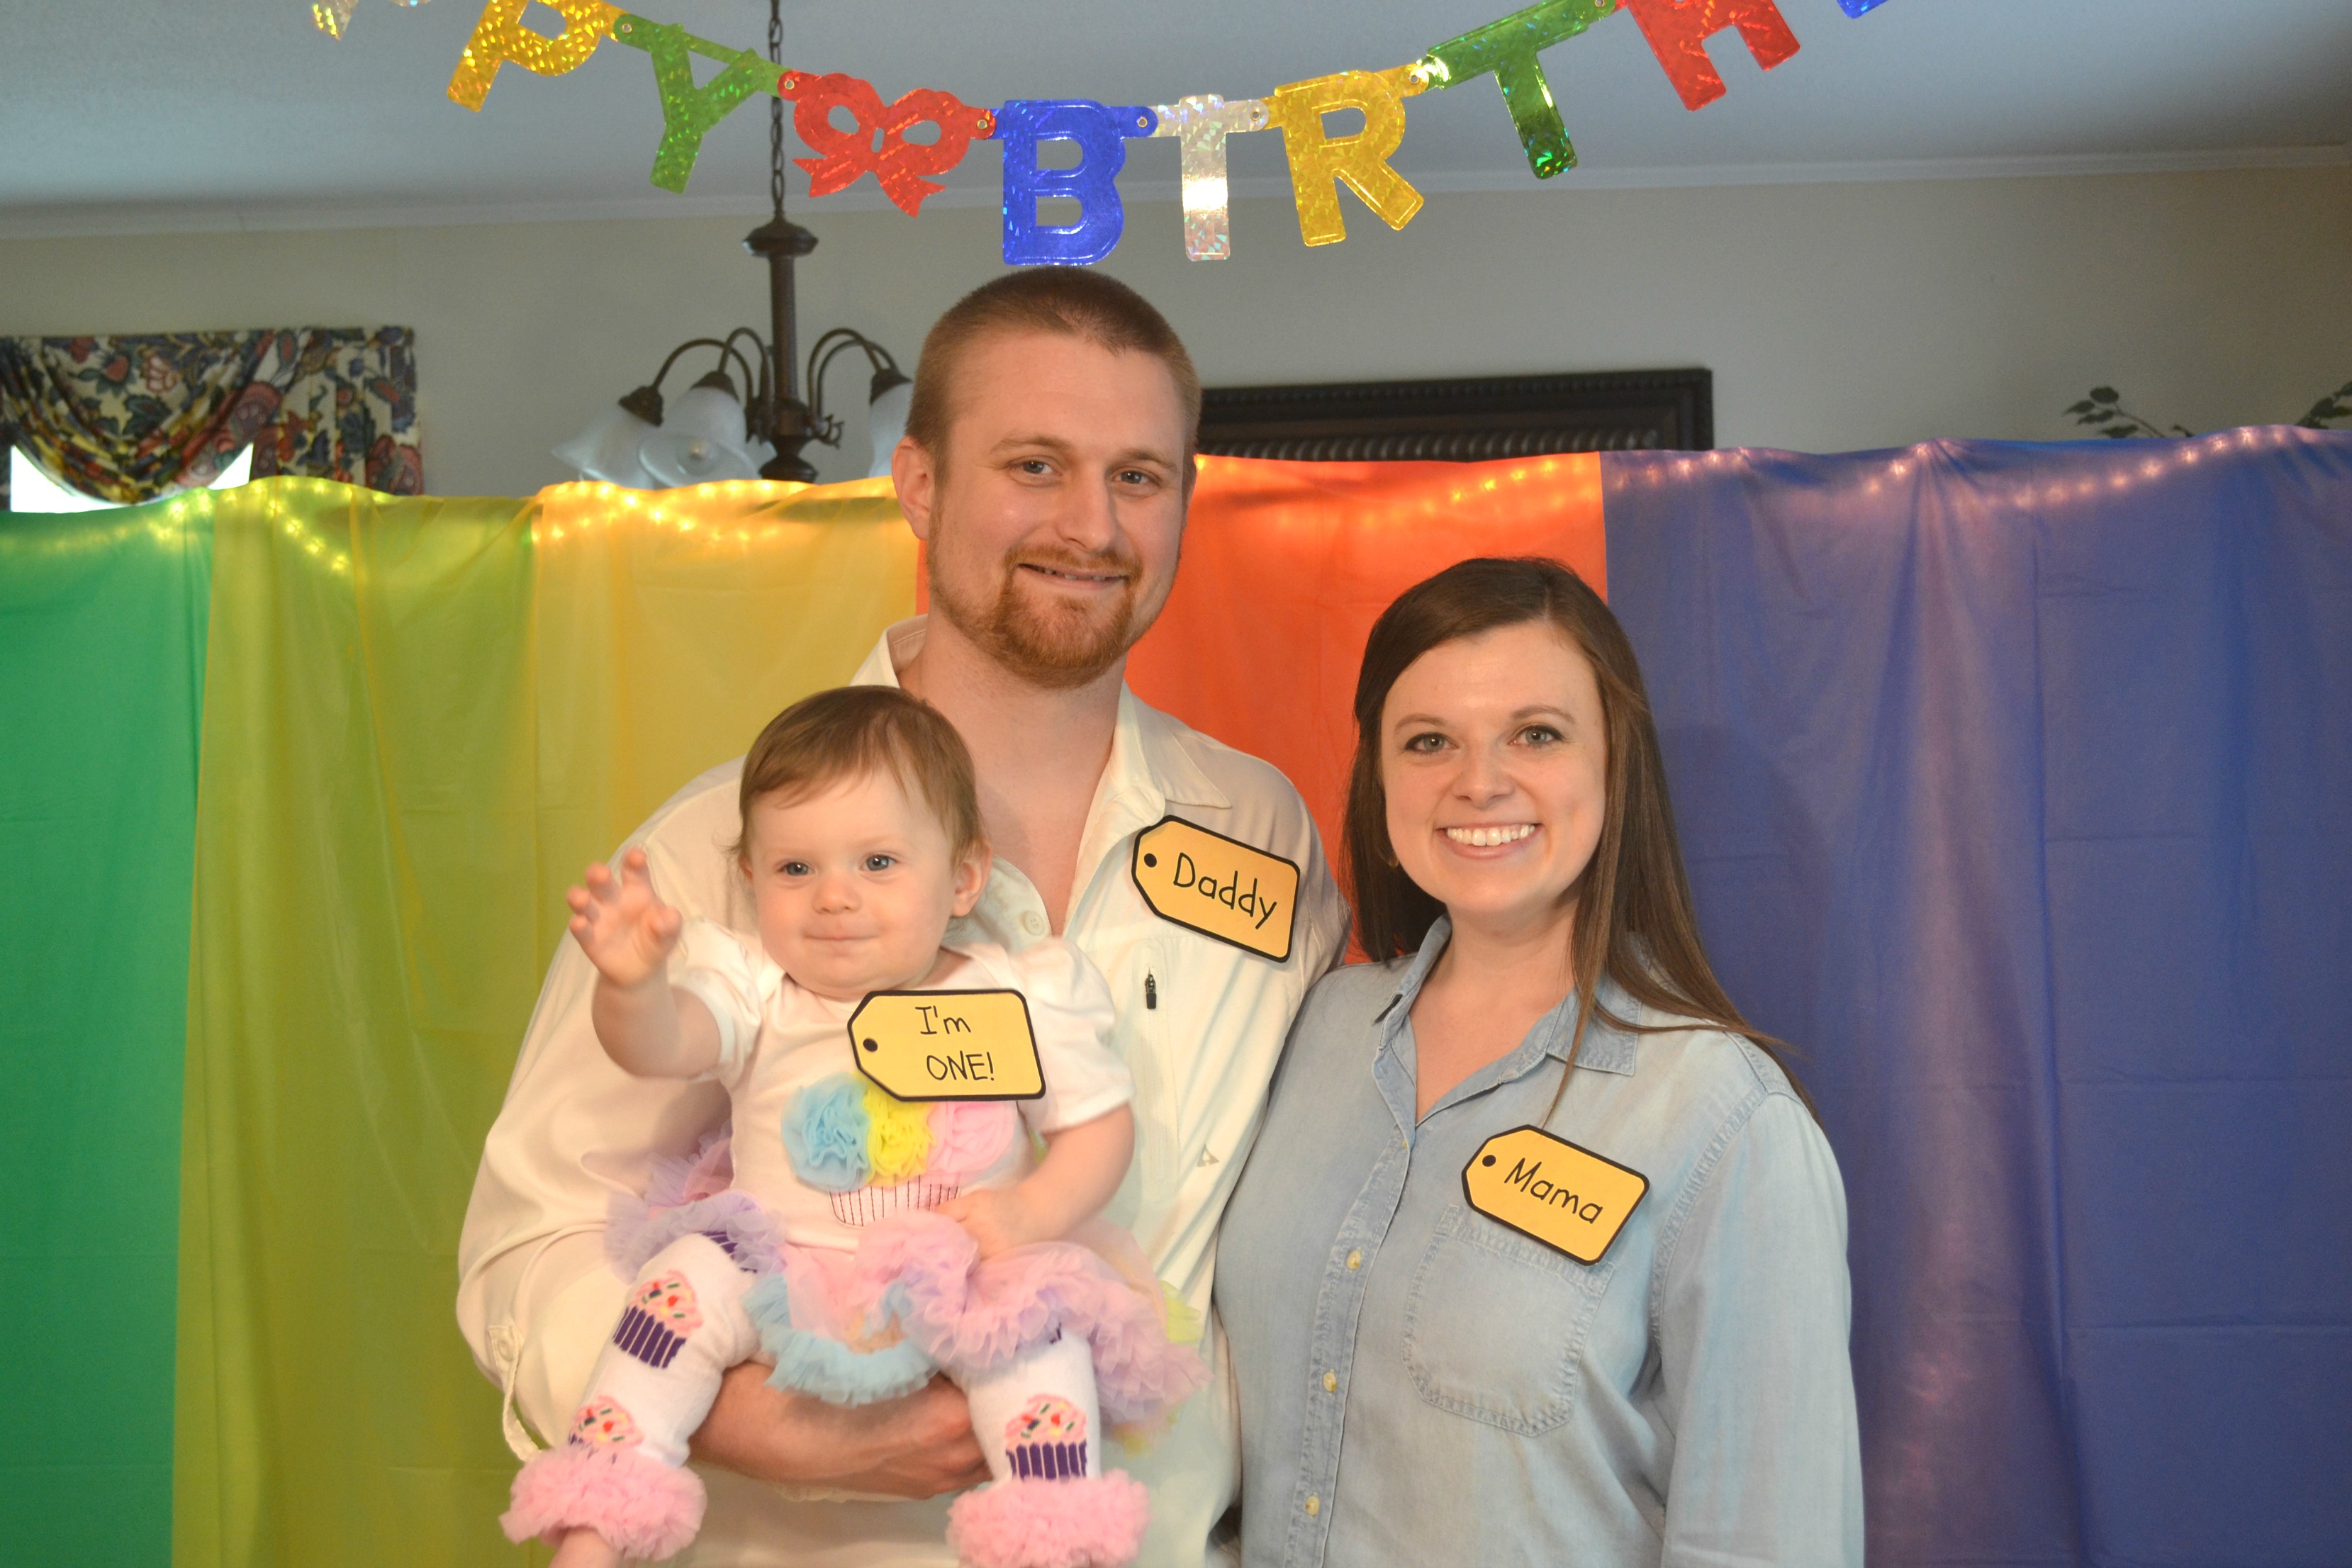 Price is Right Themed Birthday Party